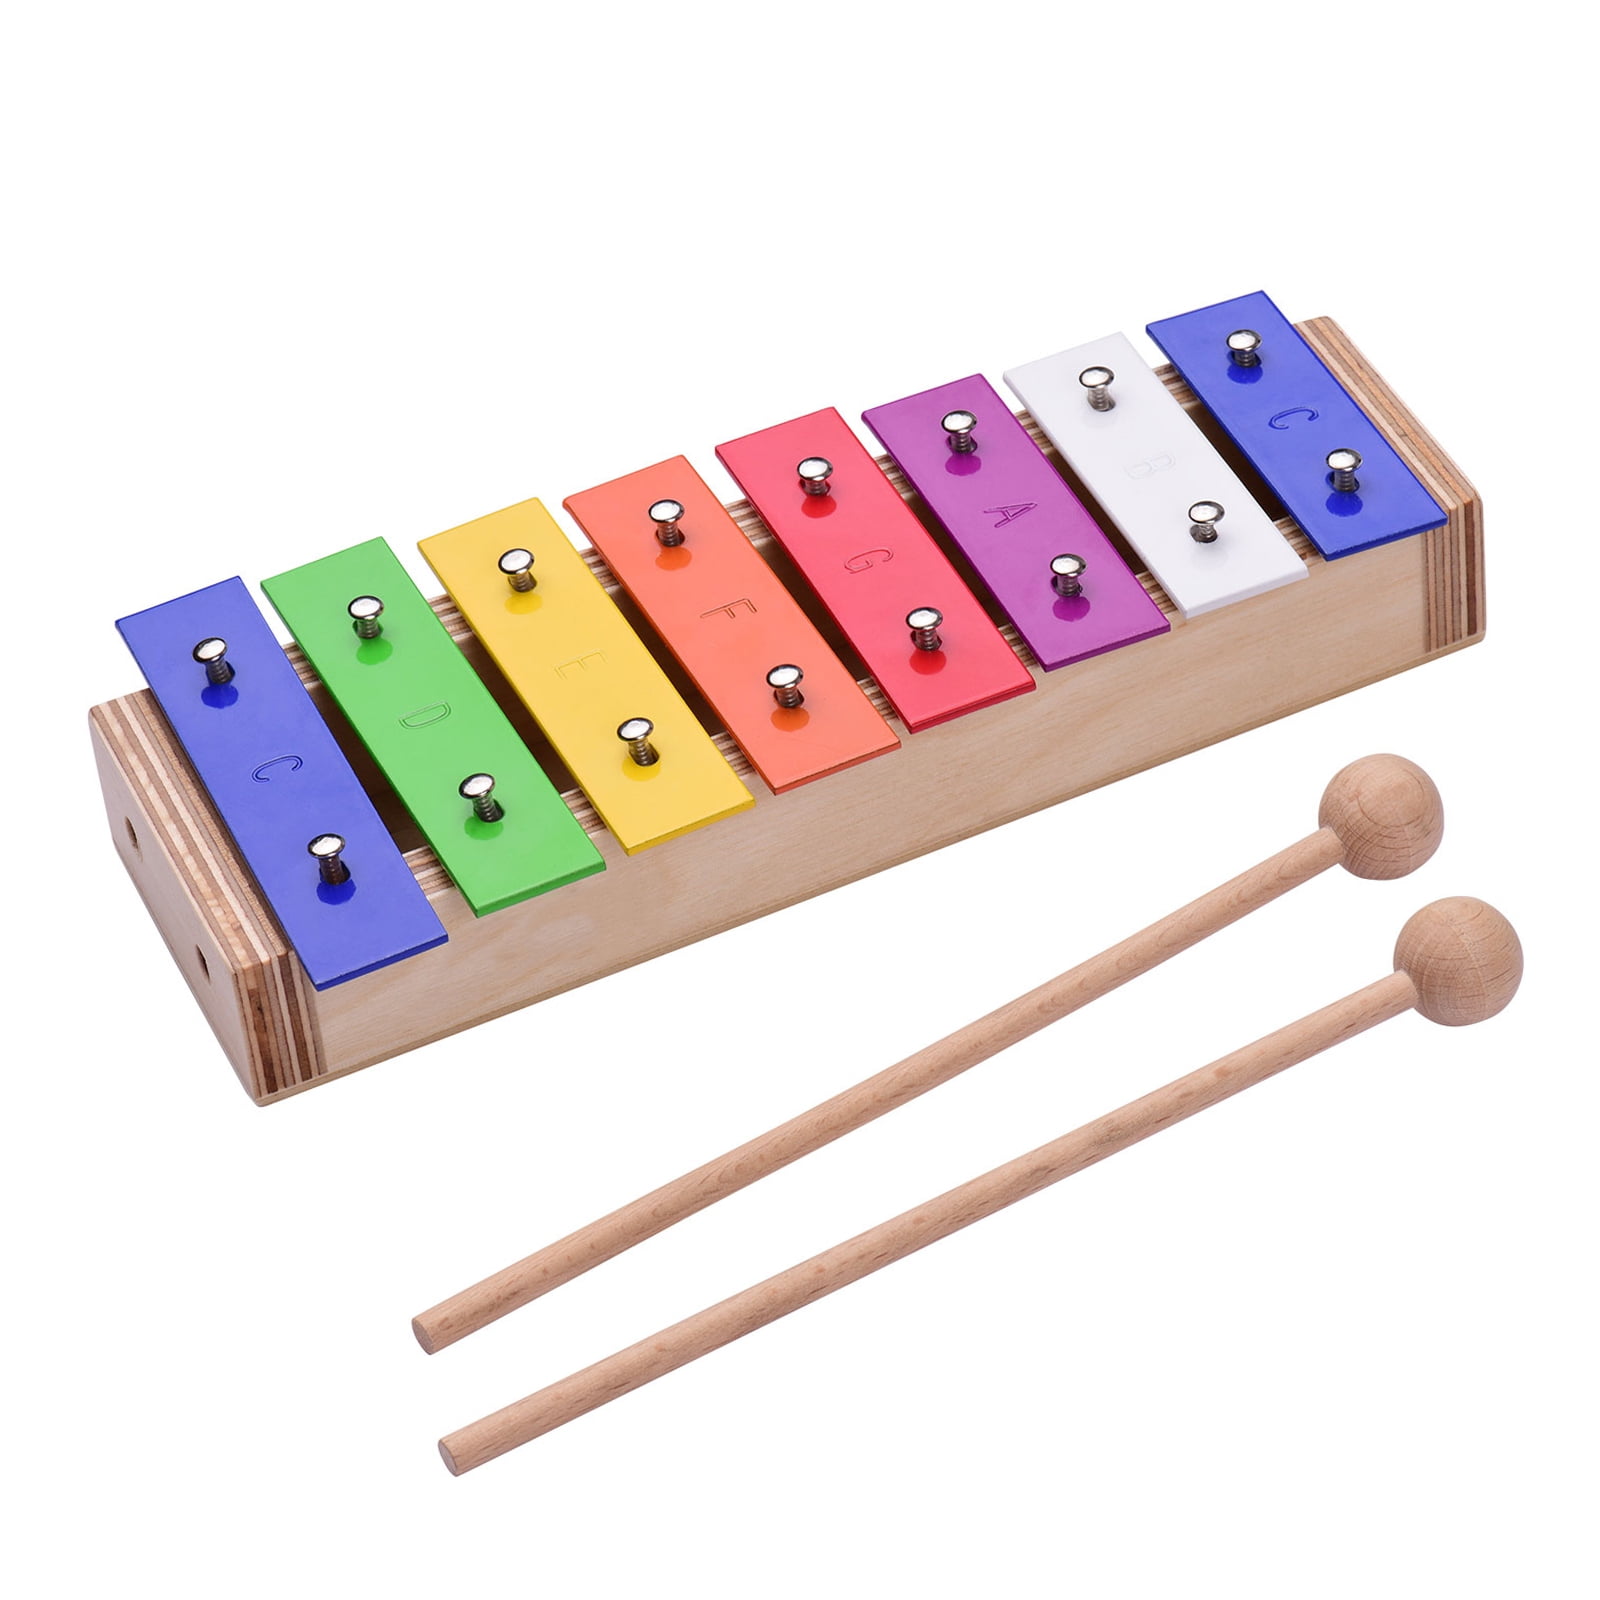 Xylophone Glockenspiel Wooden Percussion Musical Instrument with Free Song Sheet 